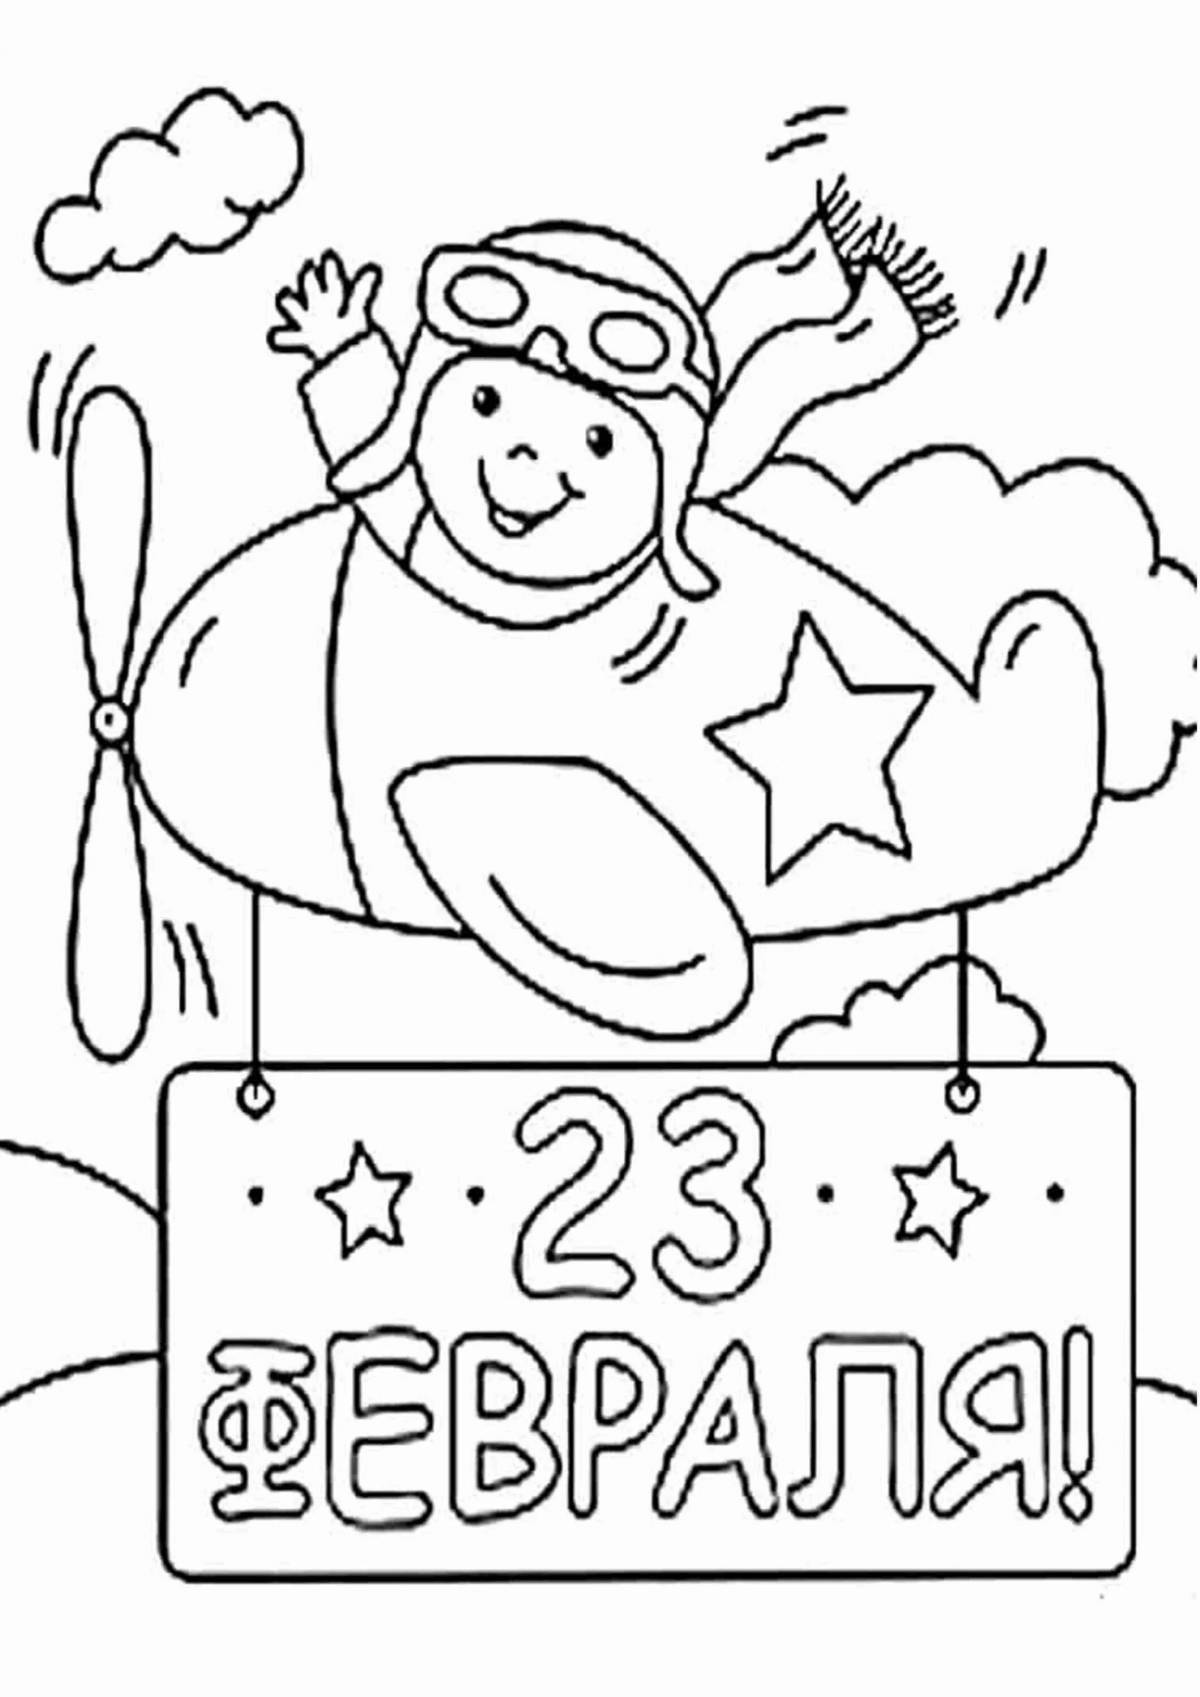 Amazing February 23 coloring book for kids